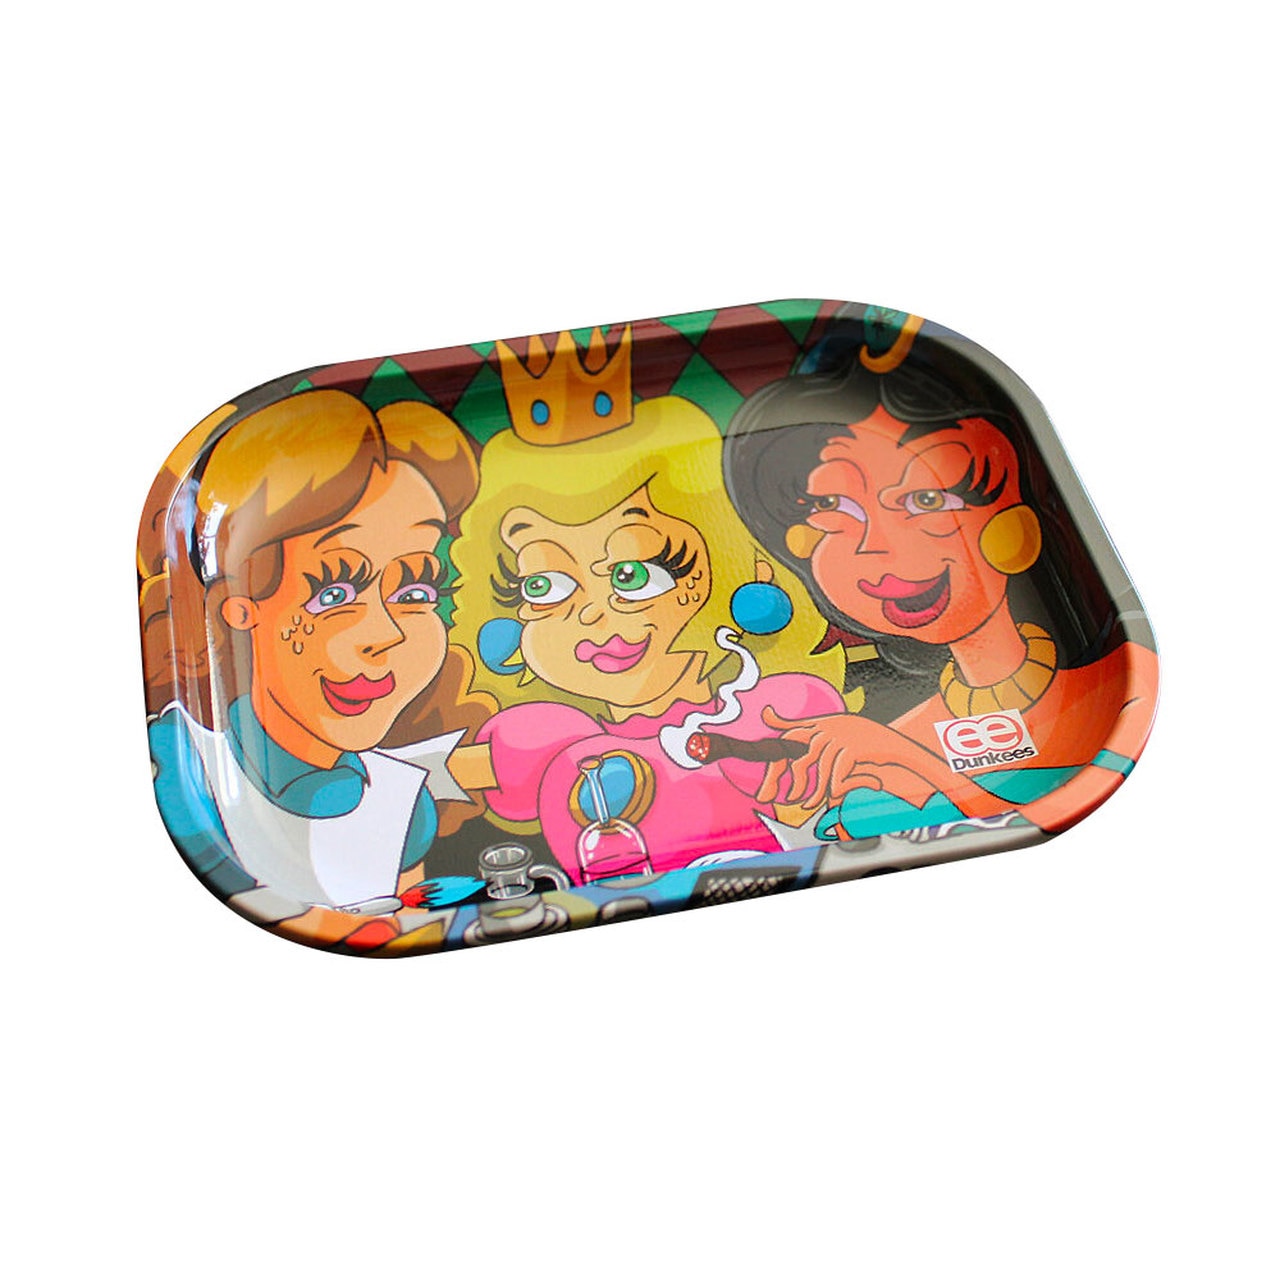 Dunkees Ladies Night Out Rolling Tray. Headshop, Vancouver Canada